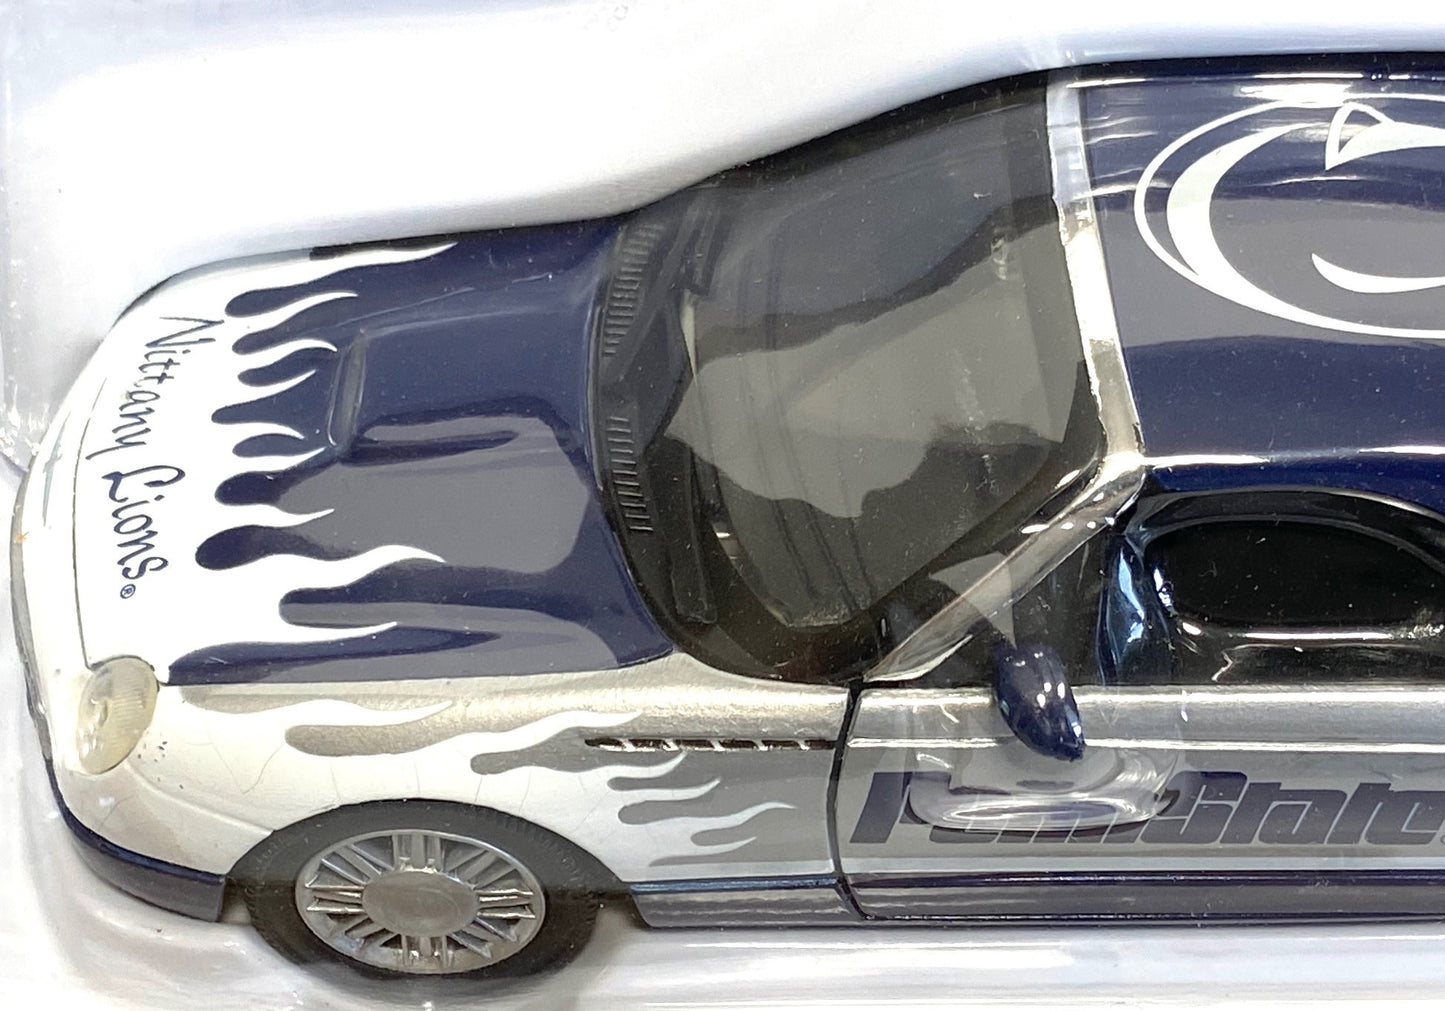 Penn State Nittany Lions Vintage 2002 NCAA 1:24 Ford Thunderbird by White Rose Collectibles